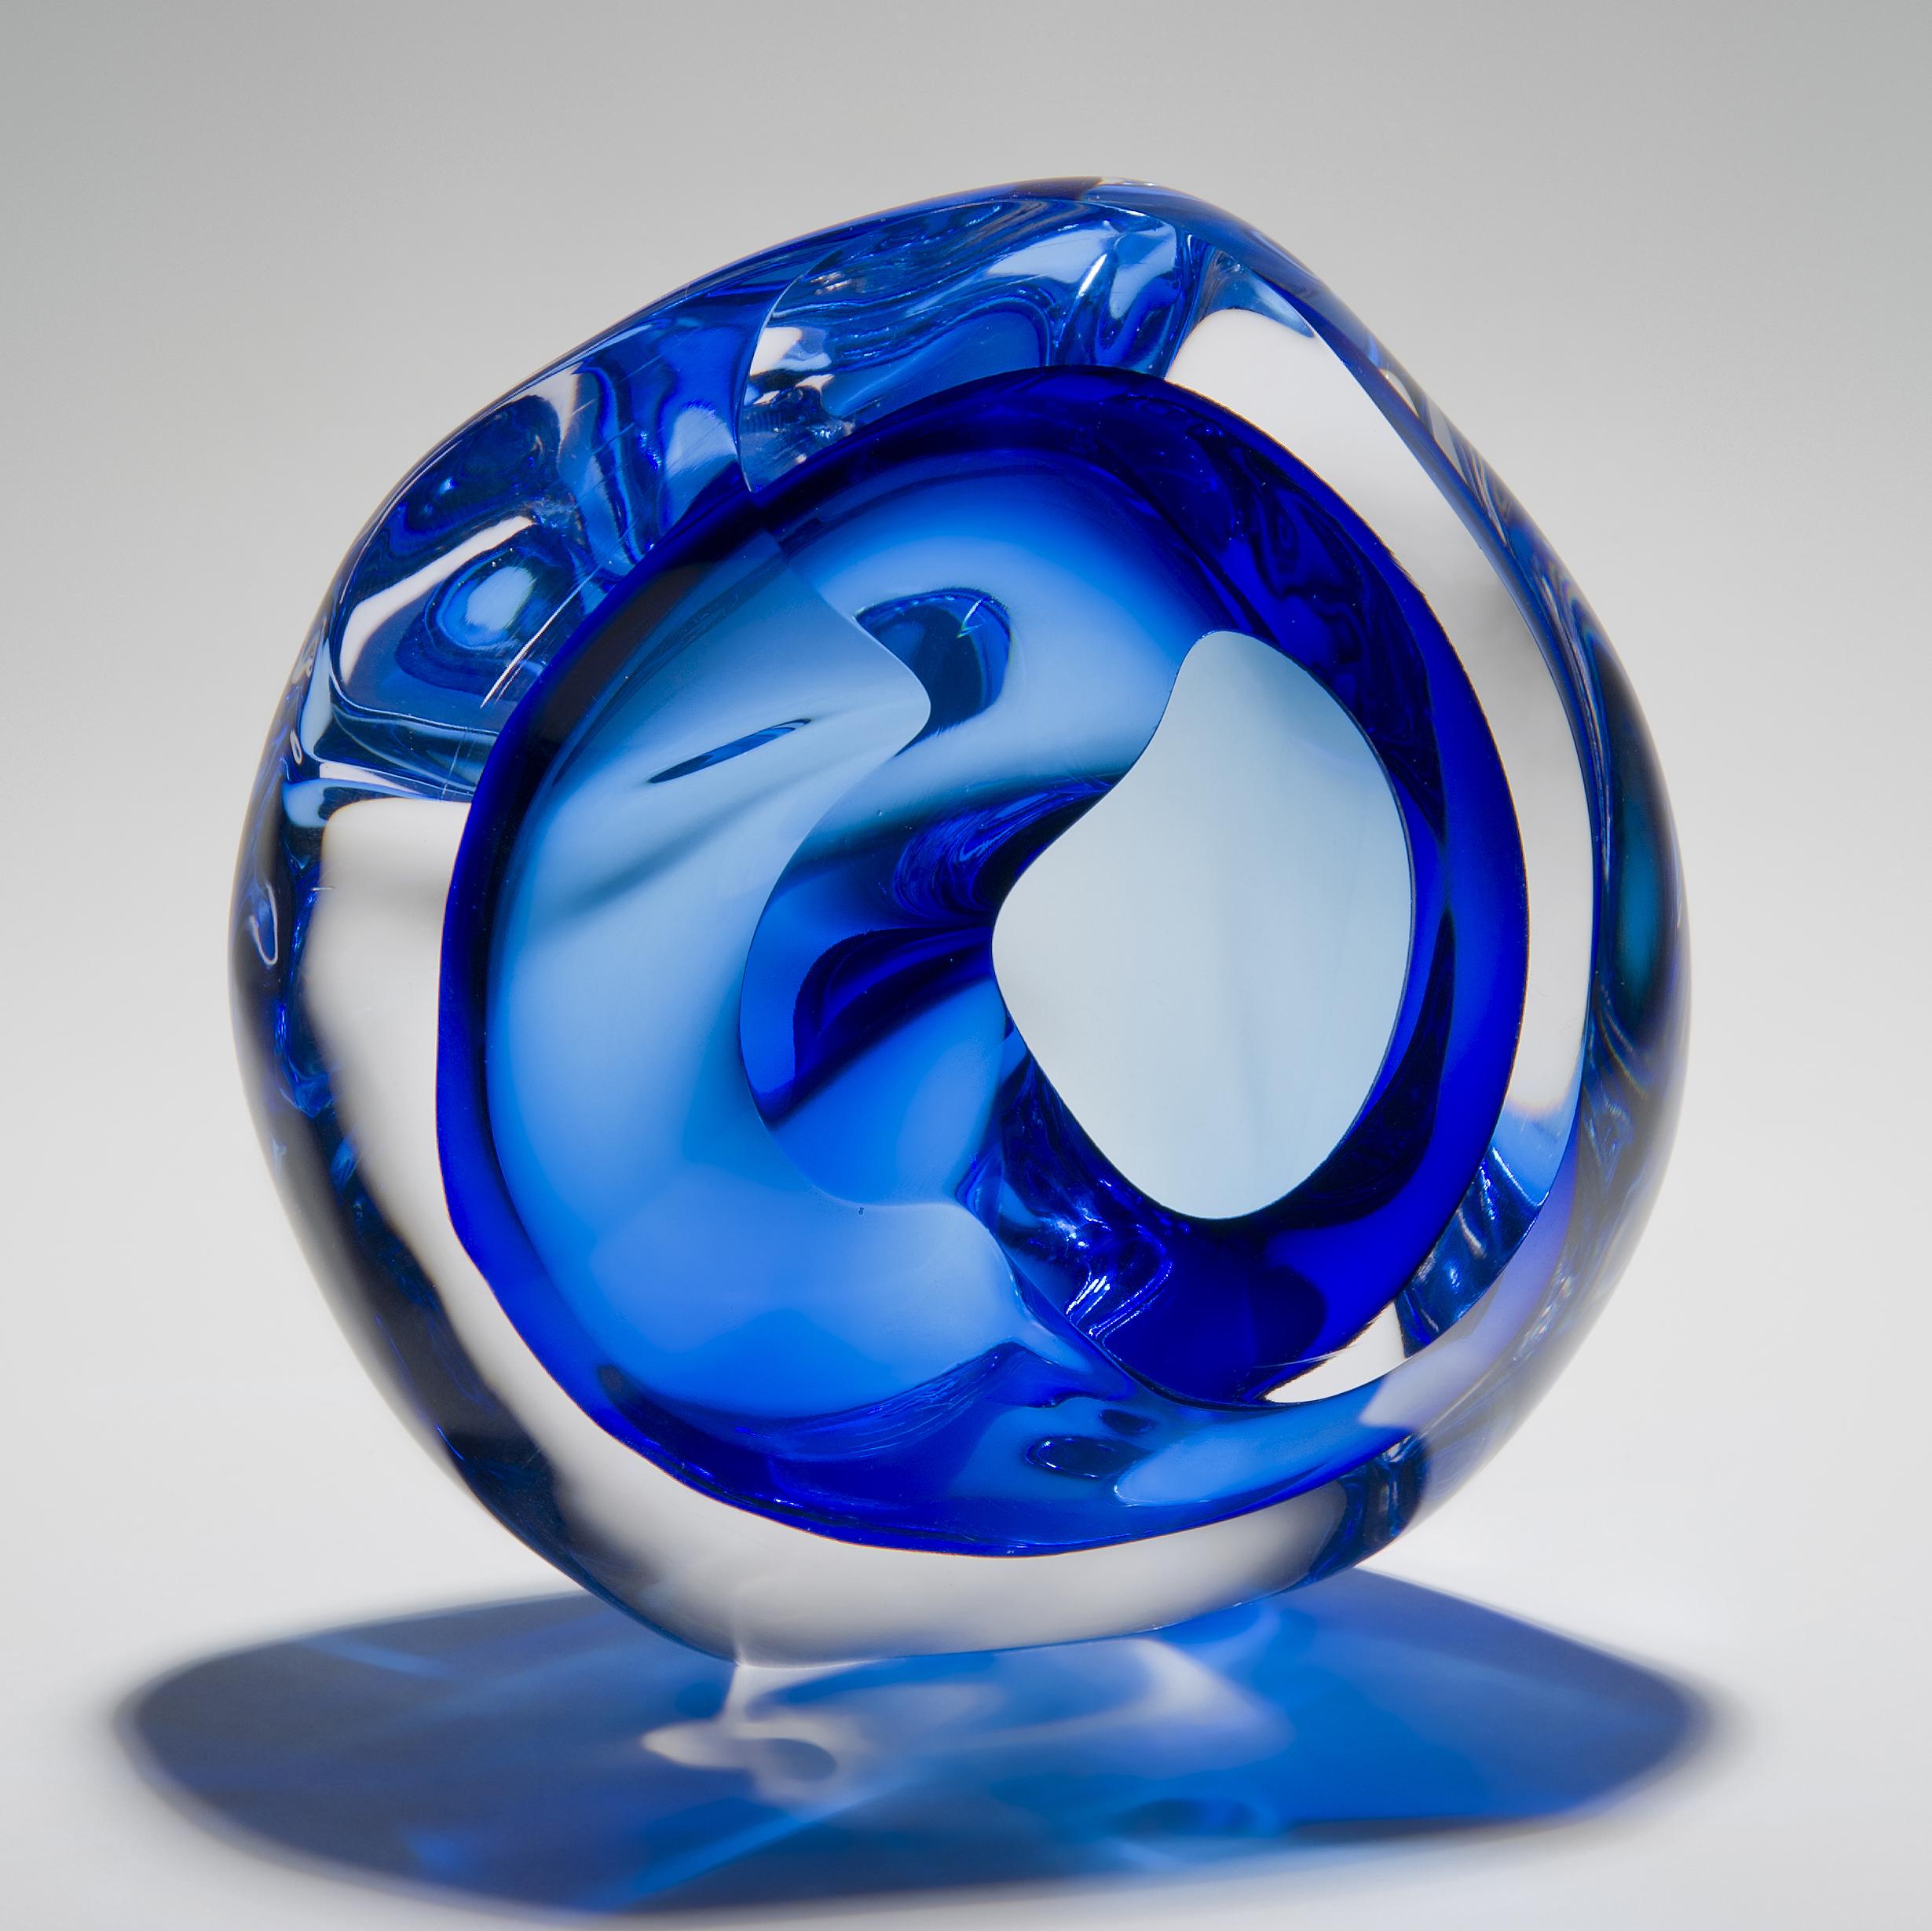 Vug in Blue is a unique hand blown sculpture by the British artist Samantha Donaldson. Created by layers of glass in blue and clear glass, these layers merge and create movement throughout the piece. An additional optical illusion is also created as